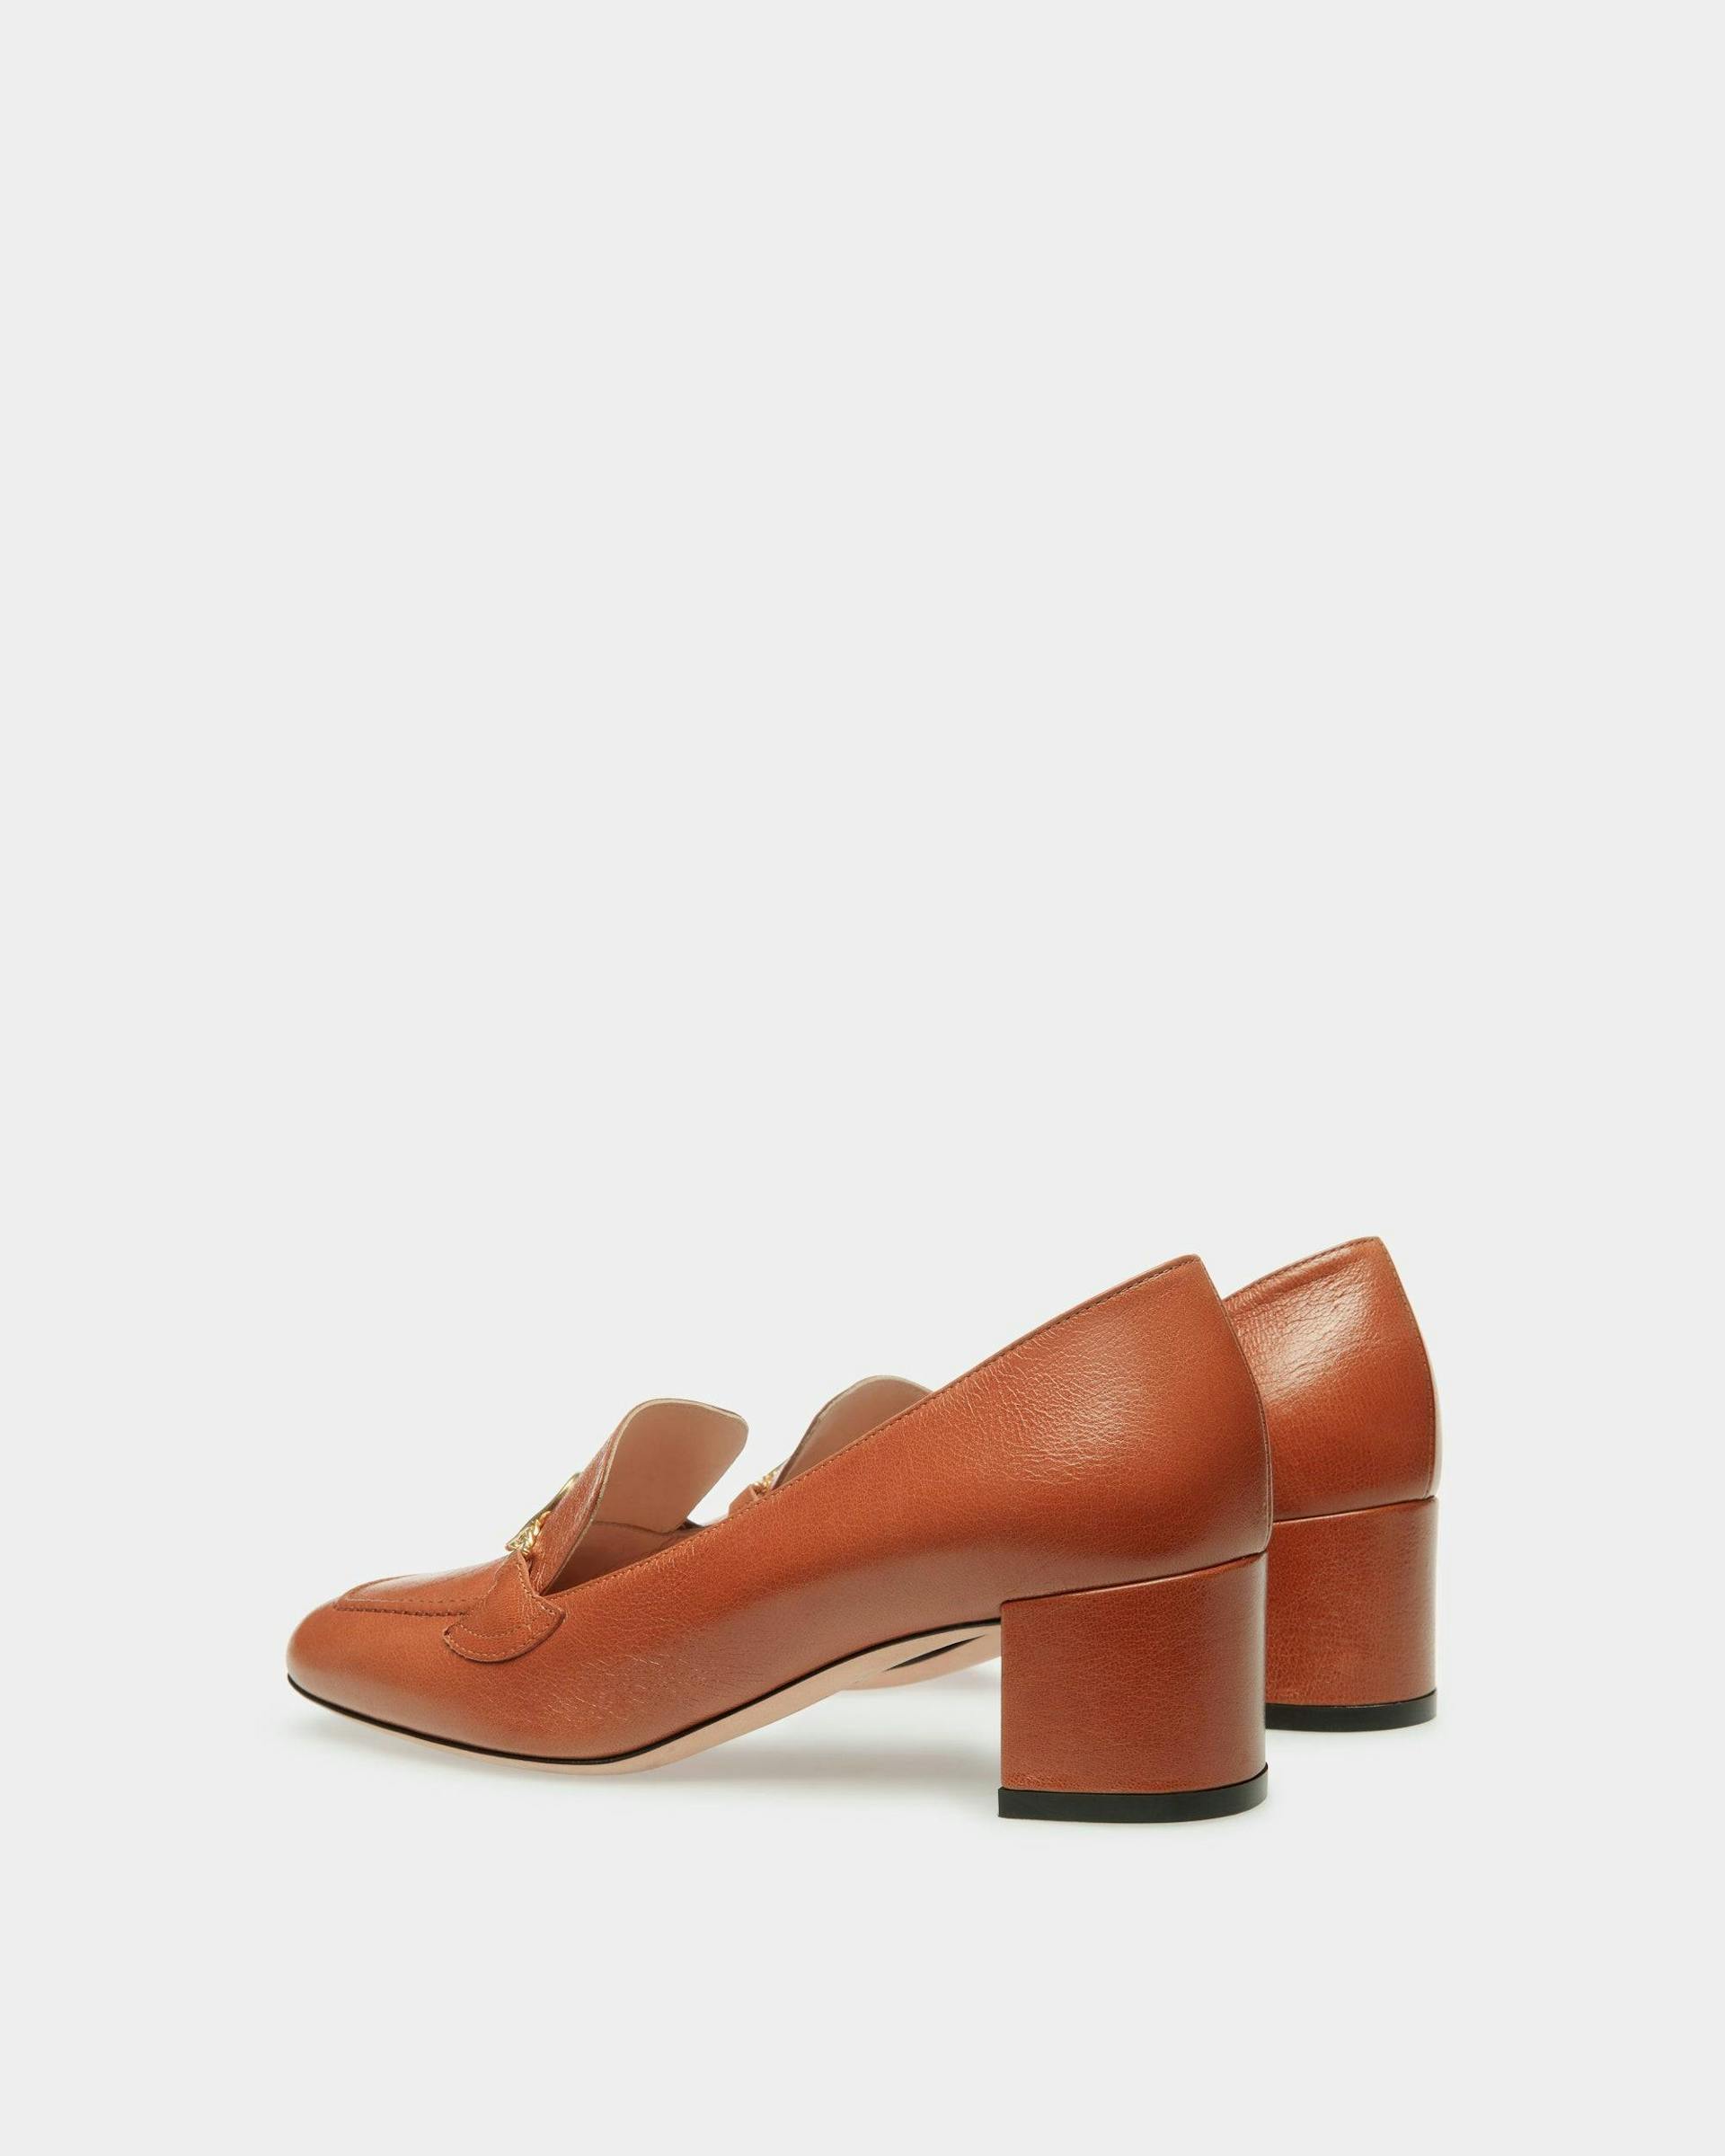 Emblem Pumps In Brown Leather - Women's - Bally - 04